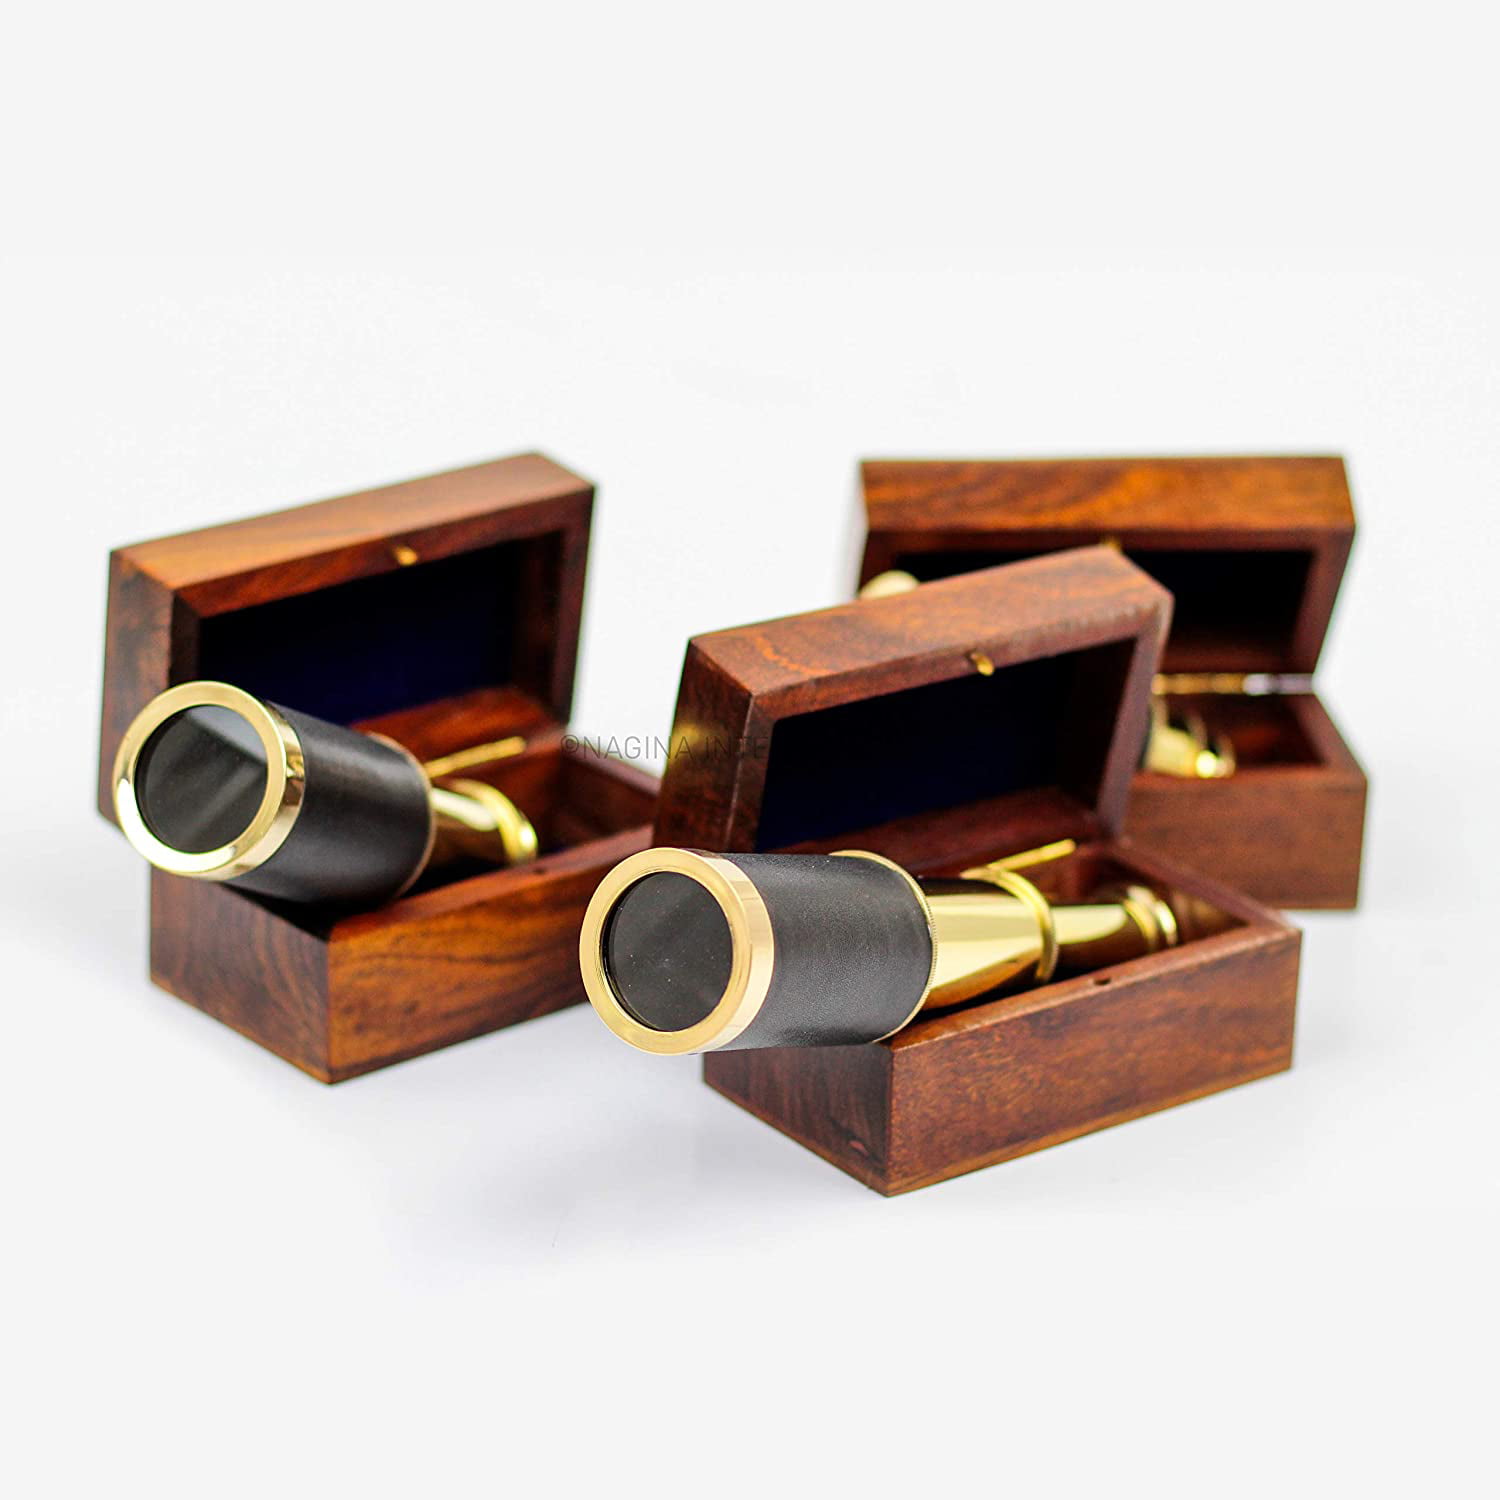 Kids Telescopes & Toys for Gifts by Nagina International Miniature Hand Crafted Brass Telescope Set of 3 with Rosewood Nautical Anchor Inlaid Box 